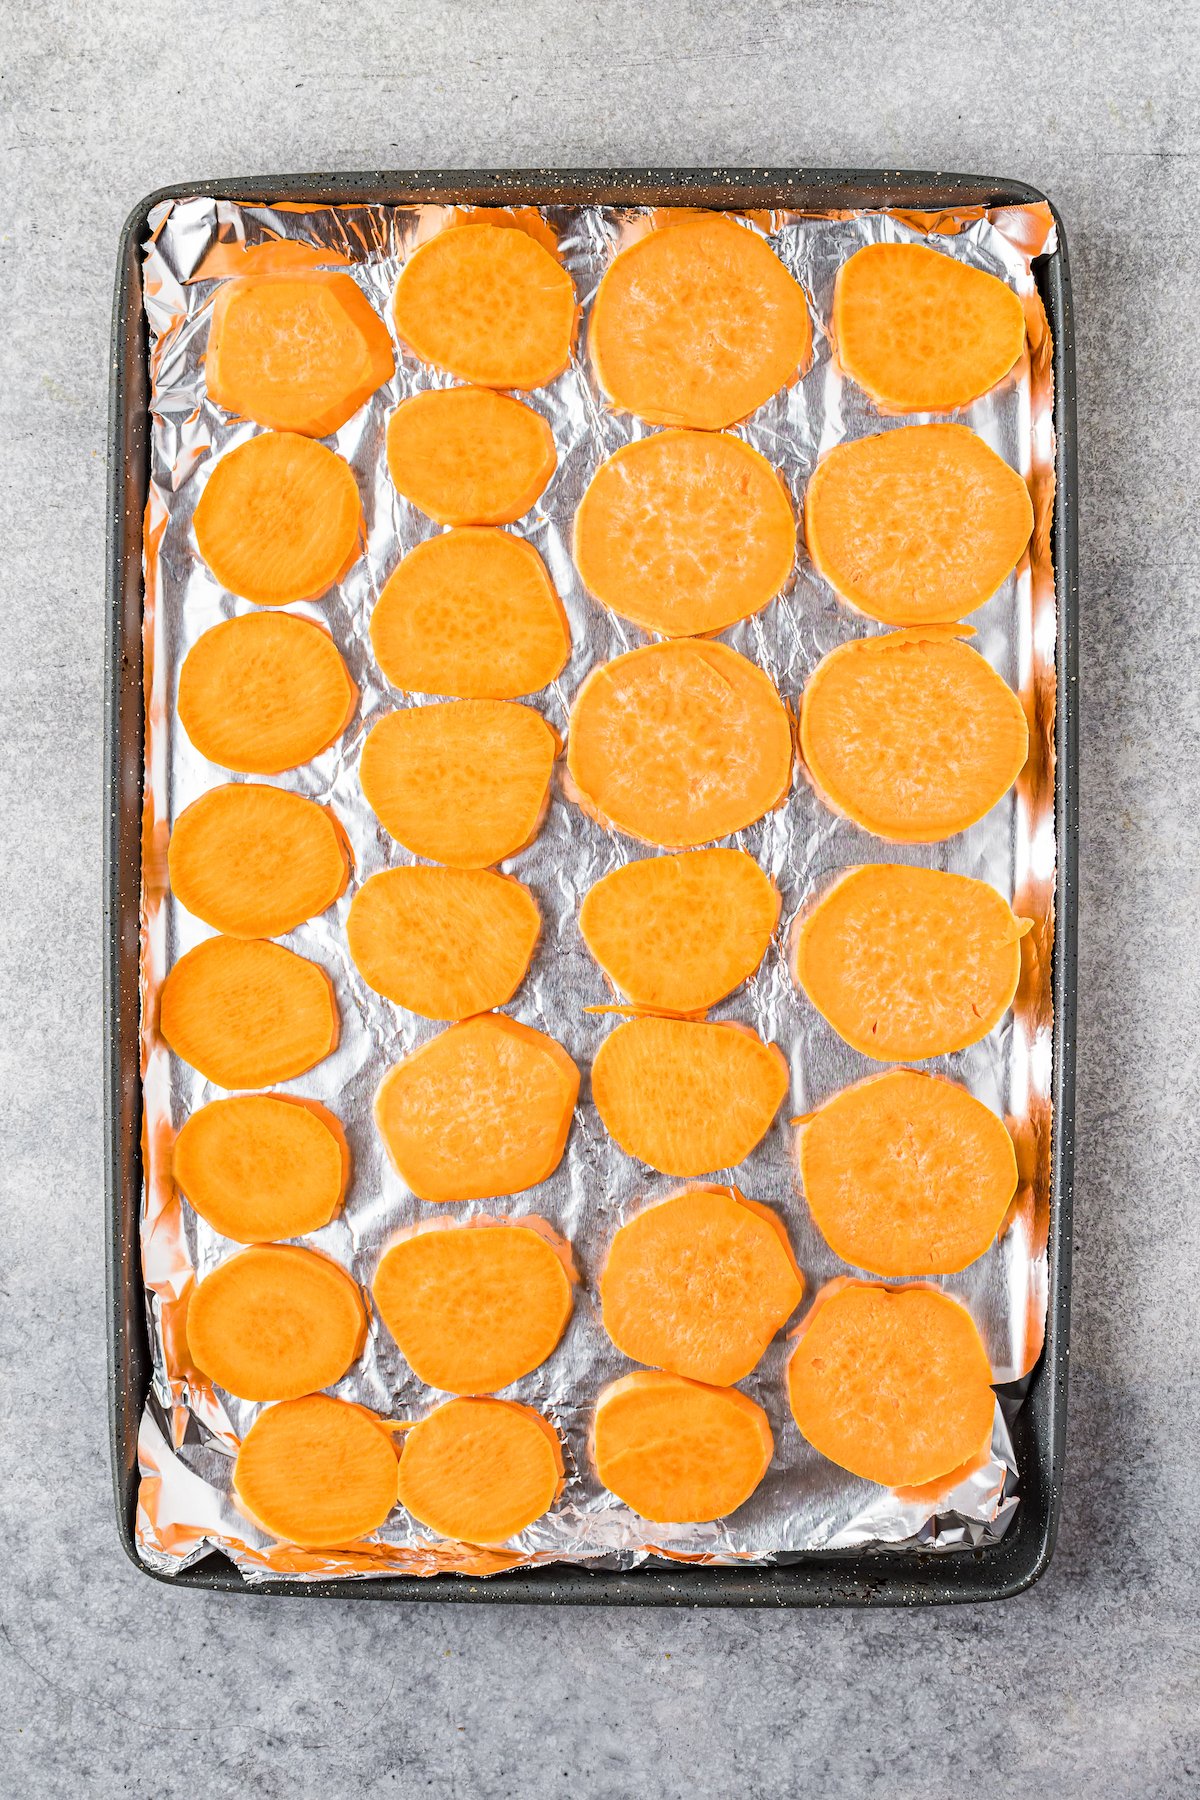 Sliced sweet potatoes on the prepared baking tray.